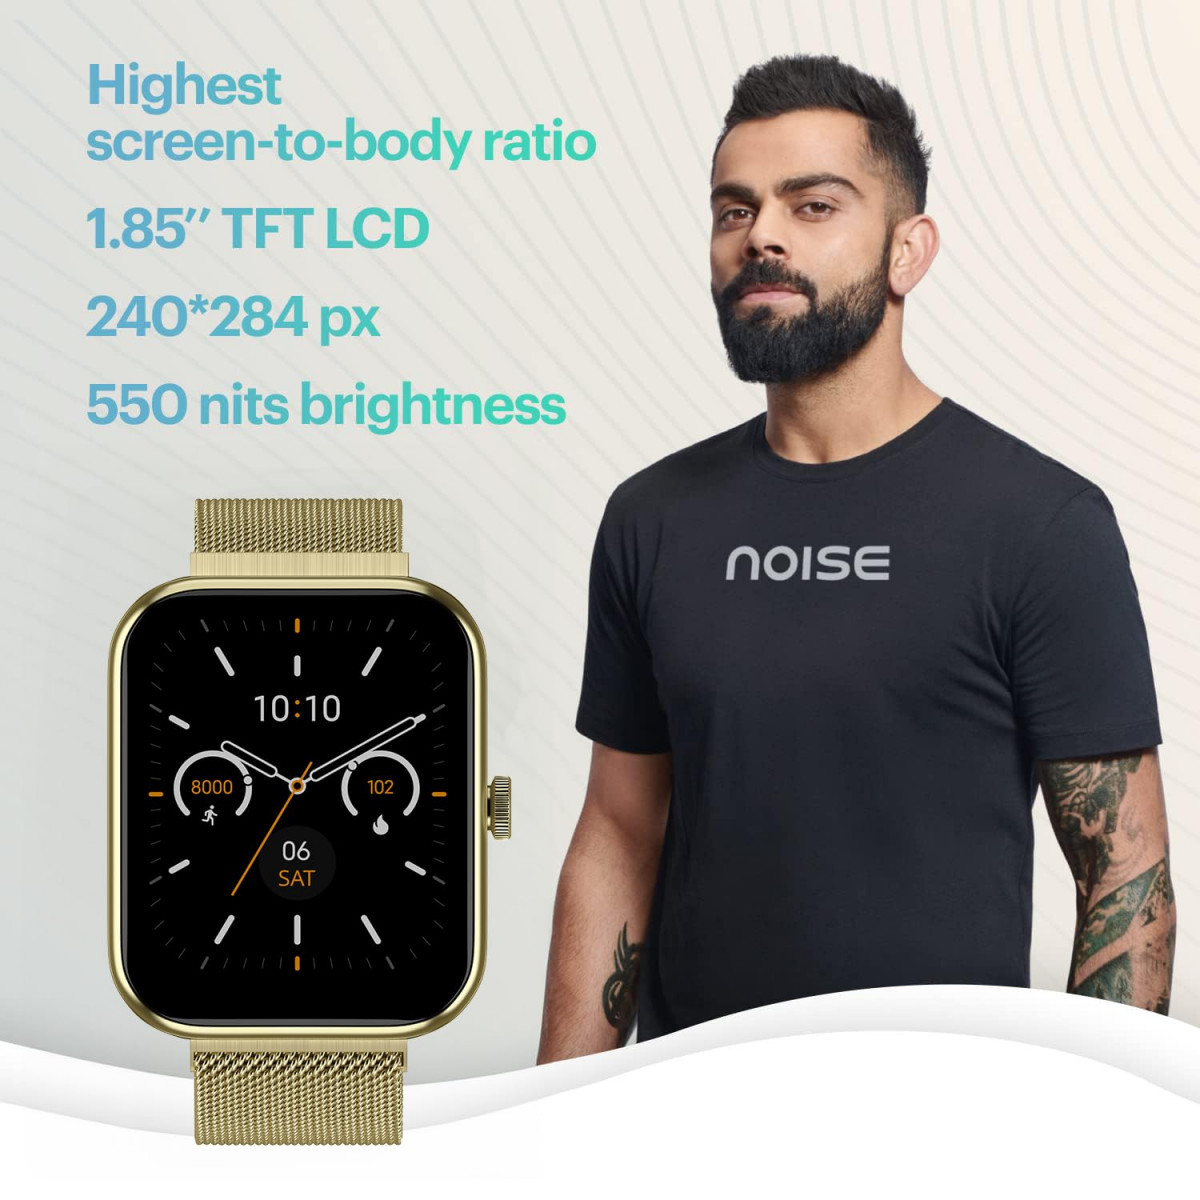 Noise Pulse 2 Max 185 Display Bluetooth Calling Smart Watch 10 Days Battery 550 NITS Brightness